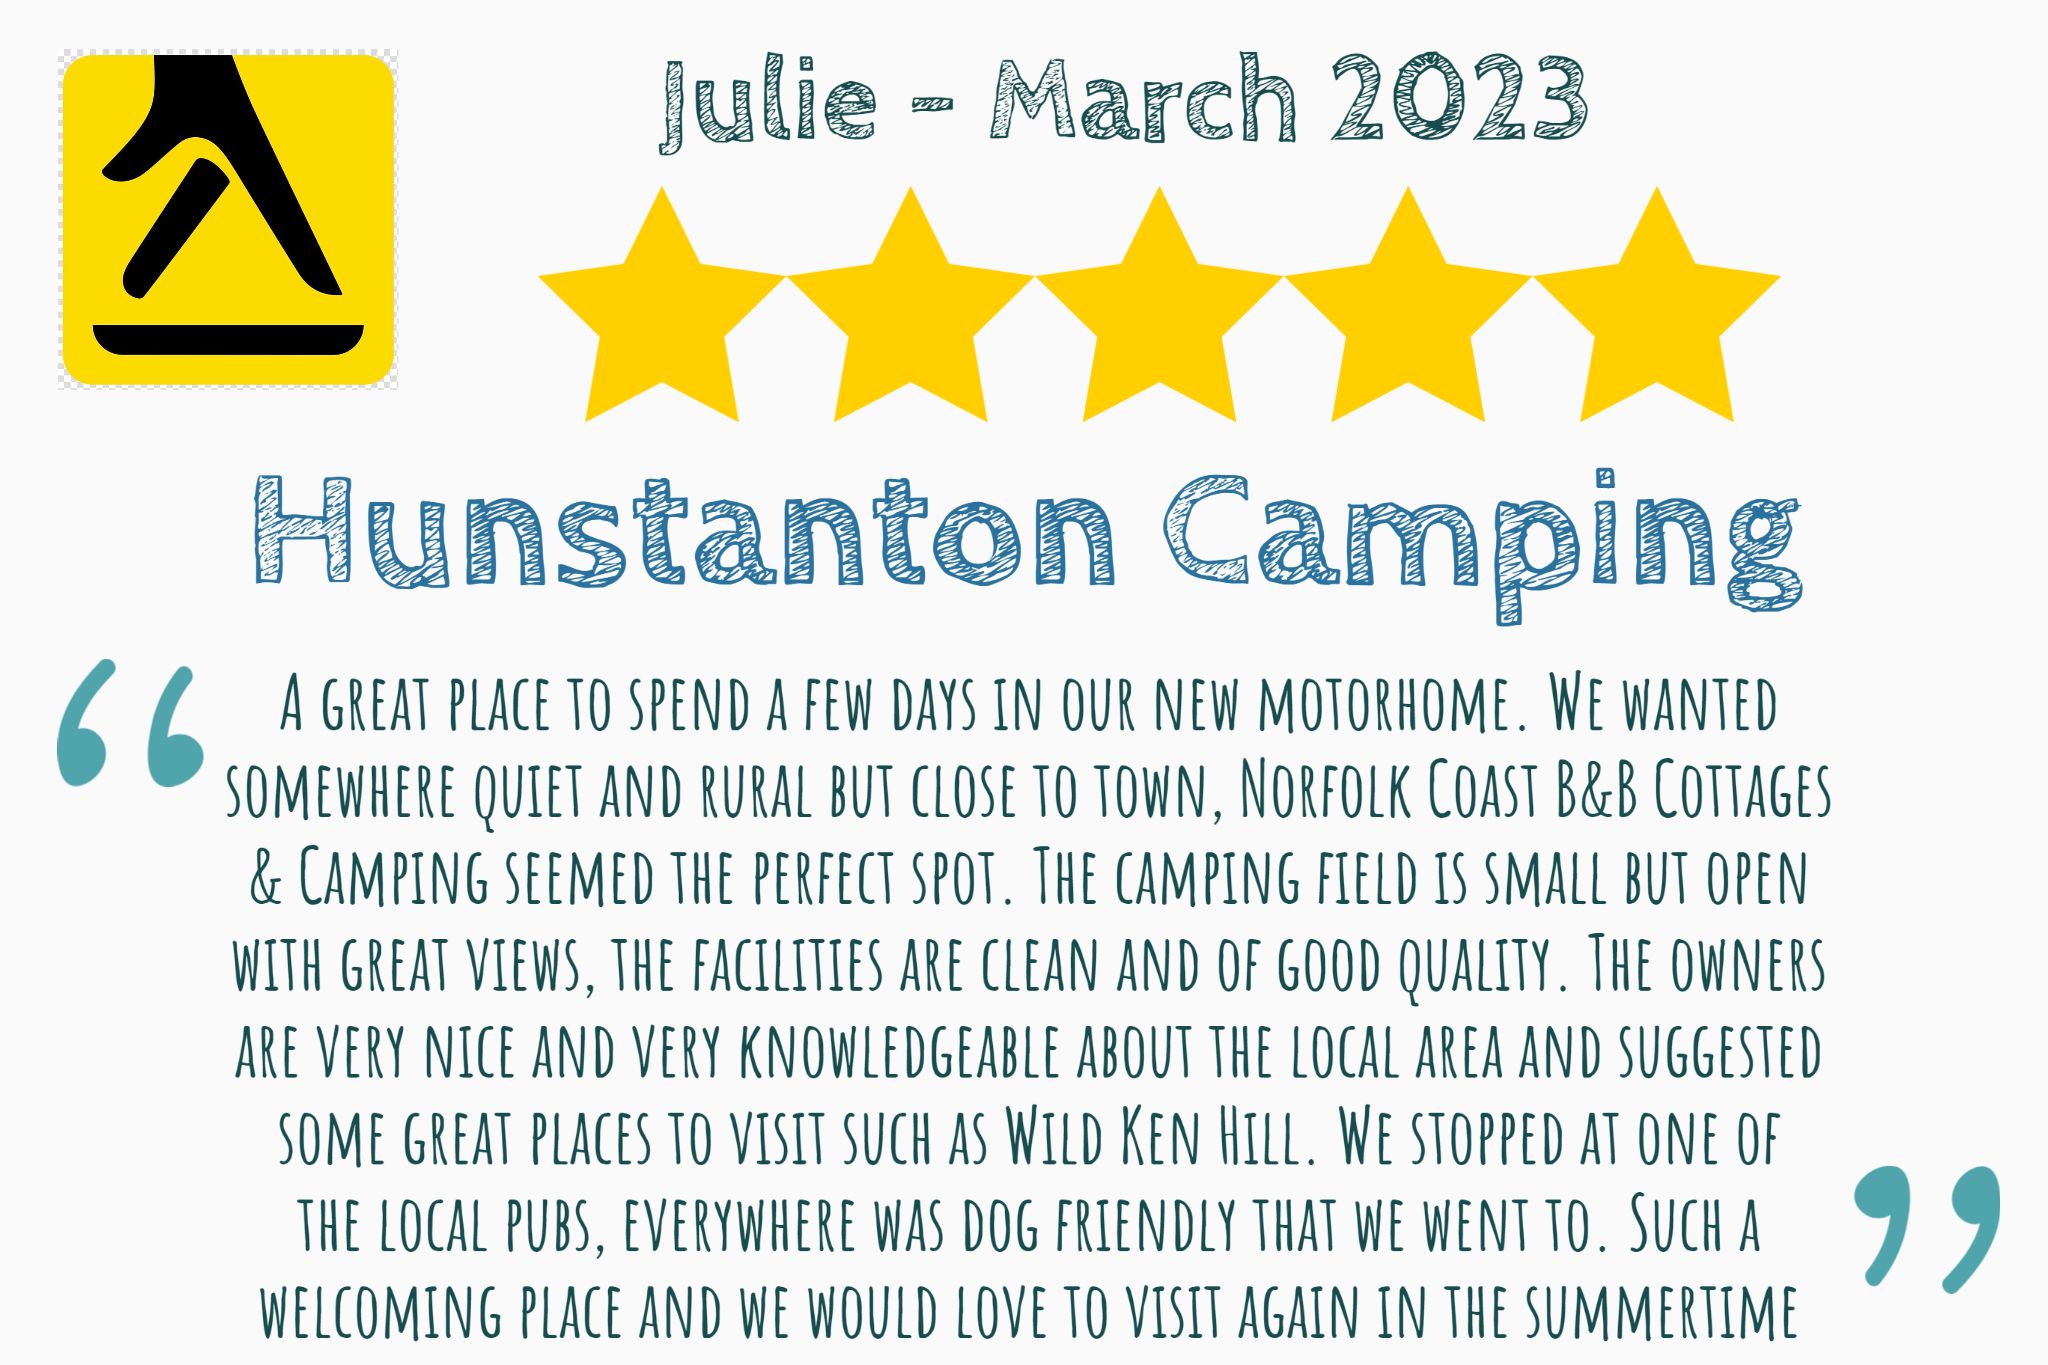 Julie's Yell.com review of Hunstanton Camping with great places to visit